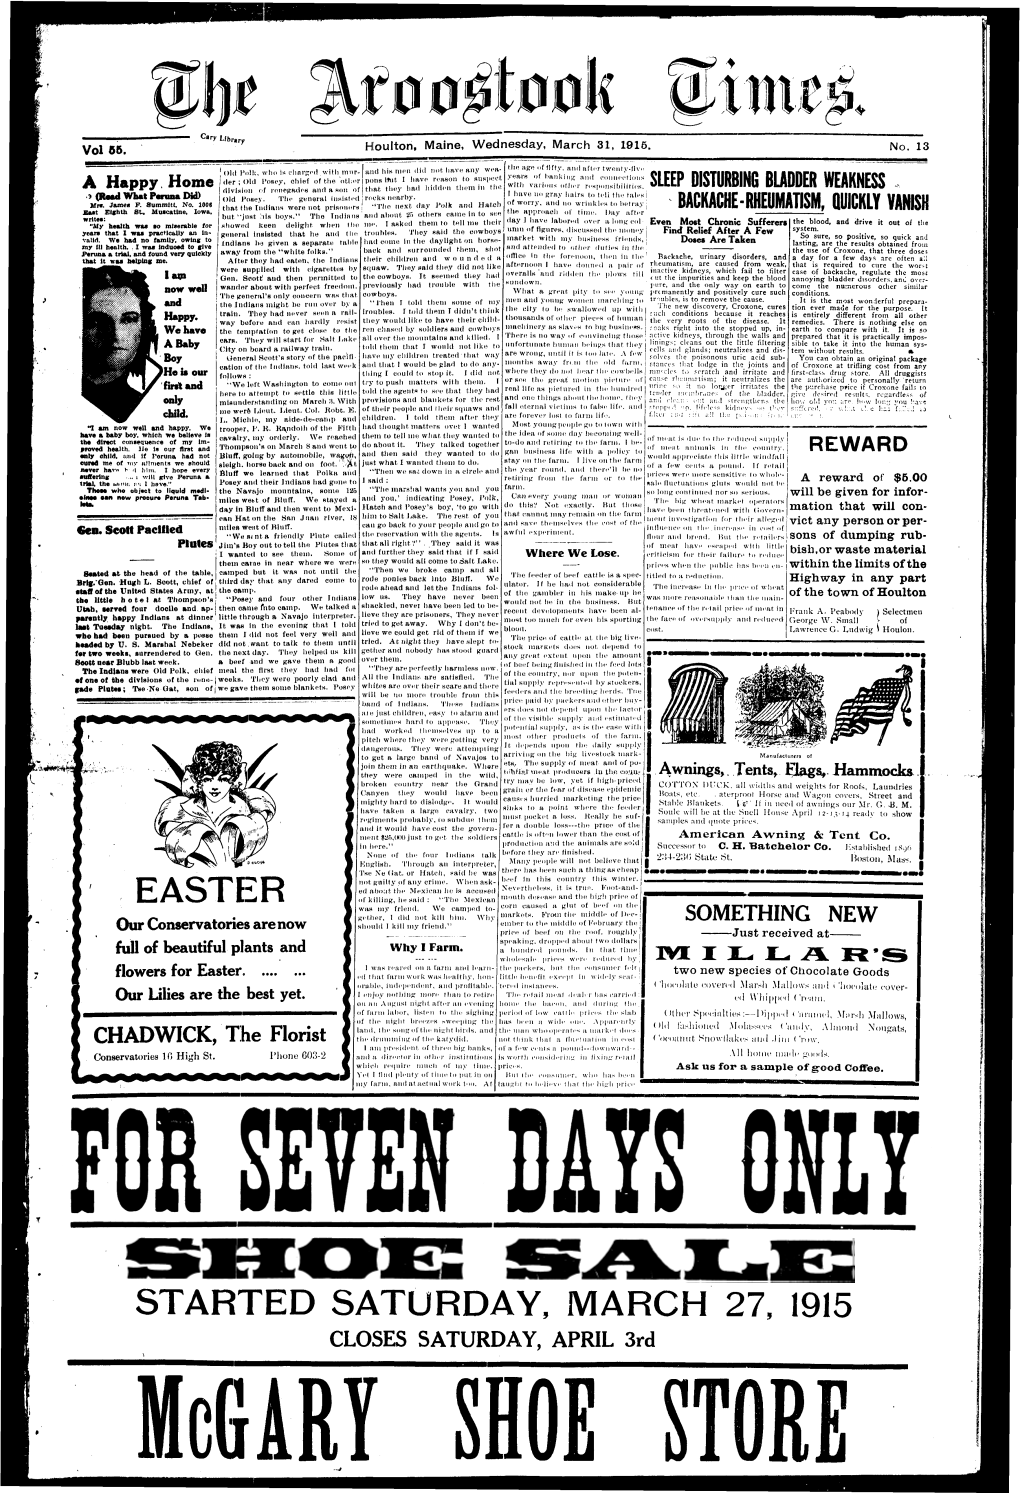 The Aroostook Times, March 31, 1915